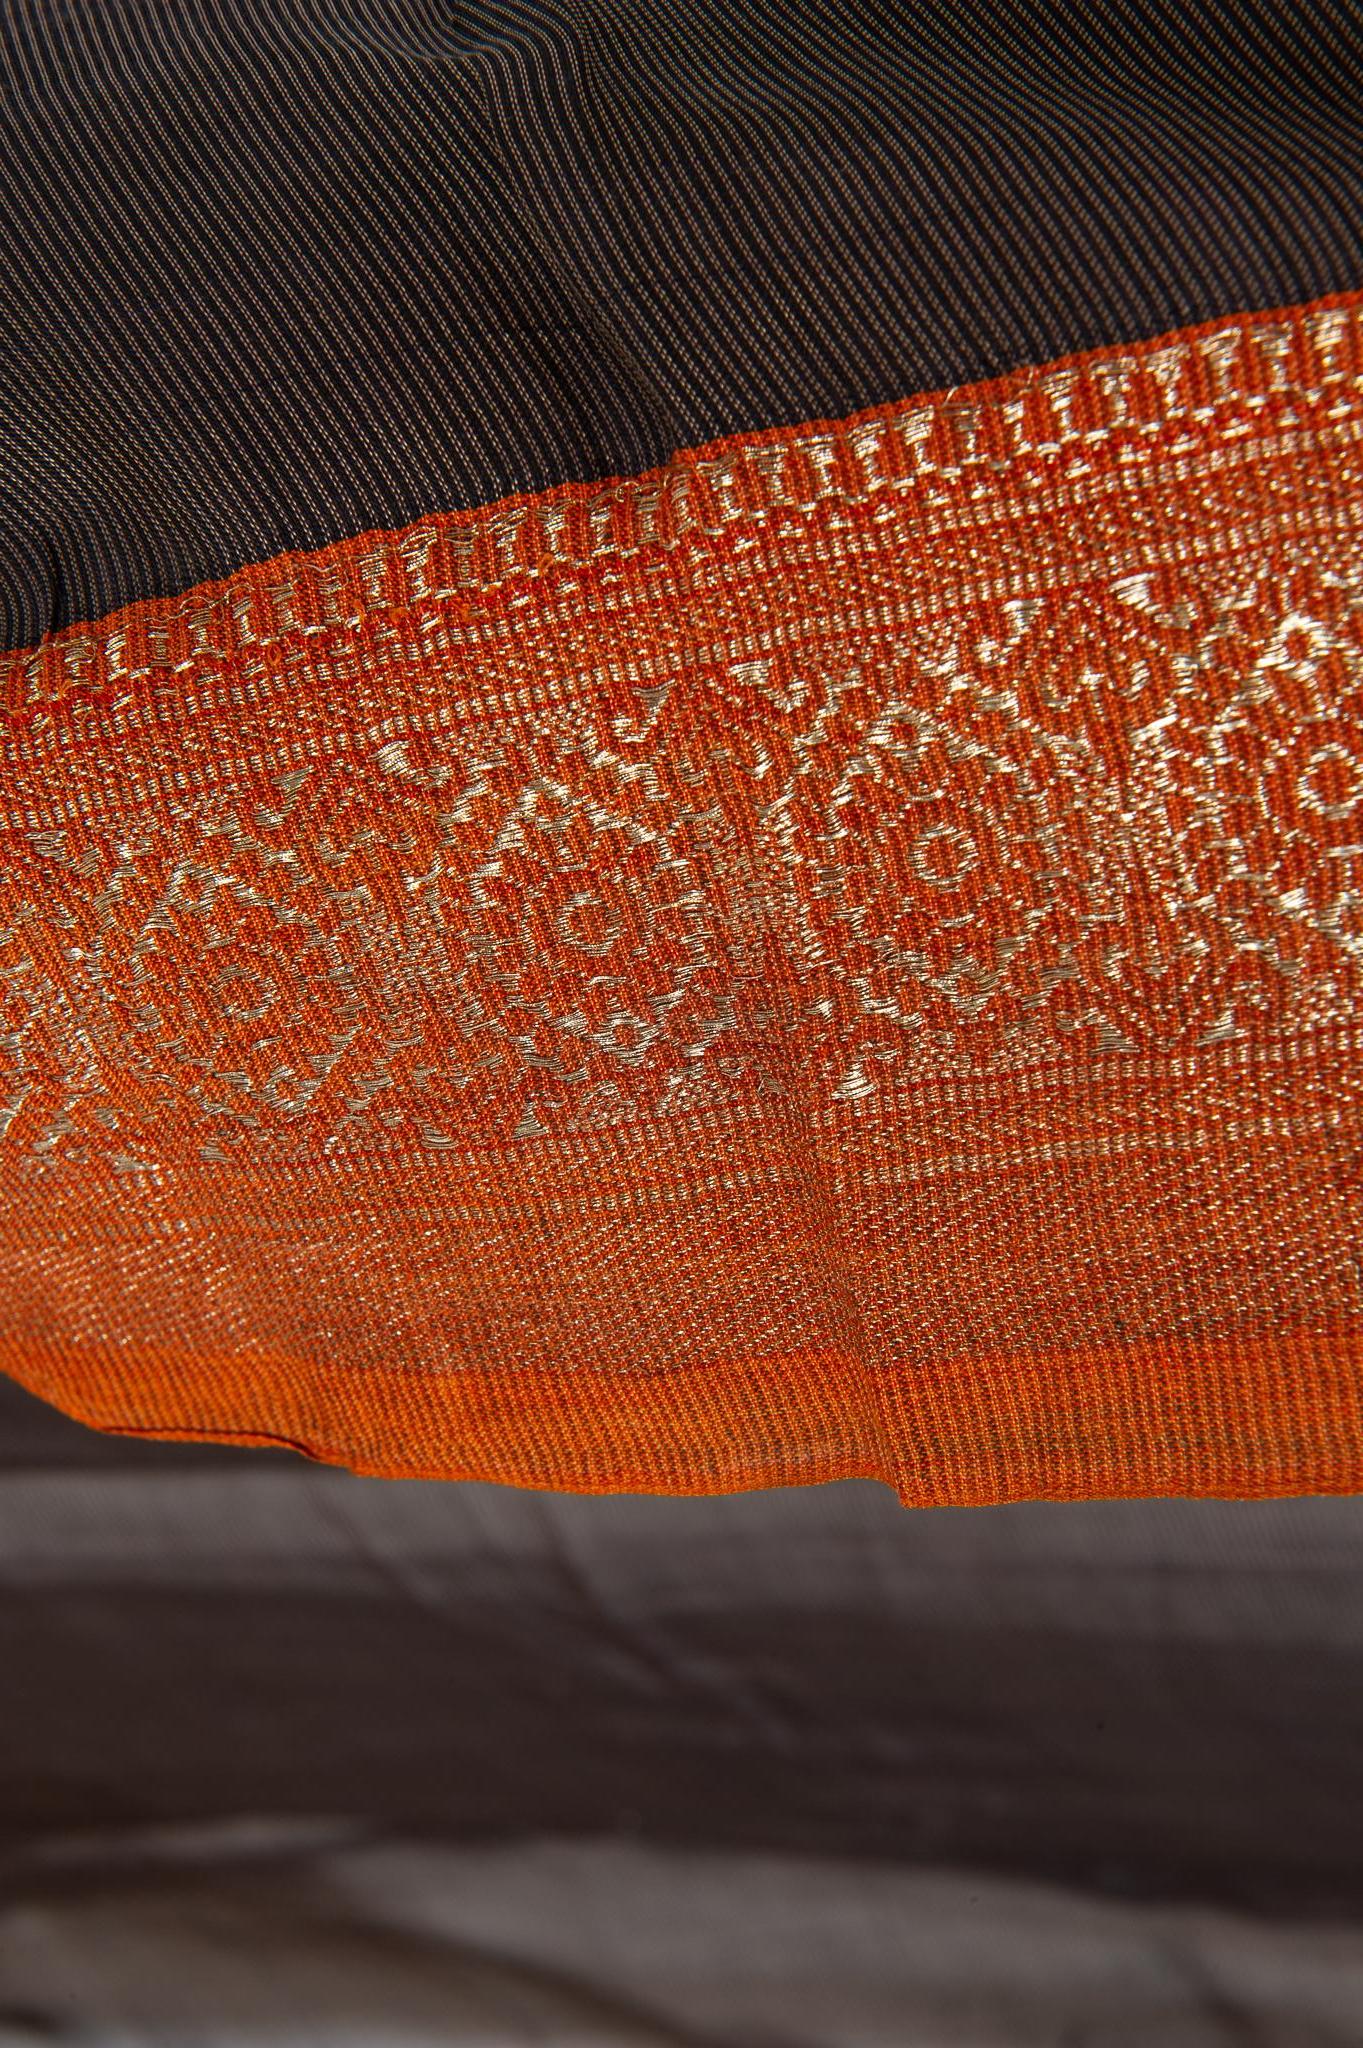  Indian Sari Brown Color, Brik Red and Gold Border, also Evening Summer Dress In Good Condition For Sale In Alessandria, Piemonte